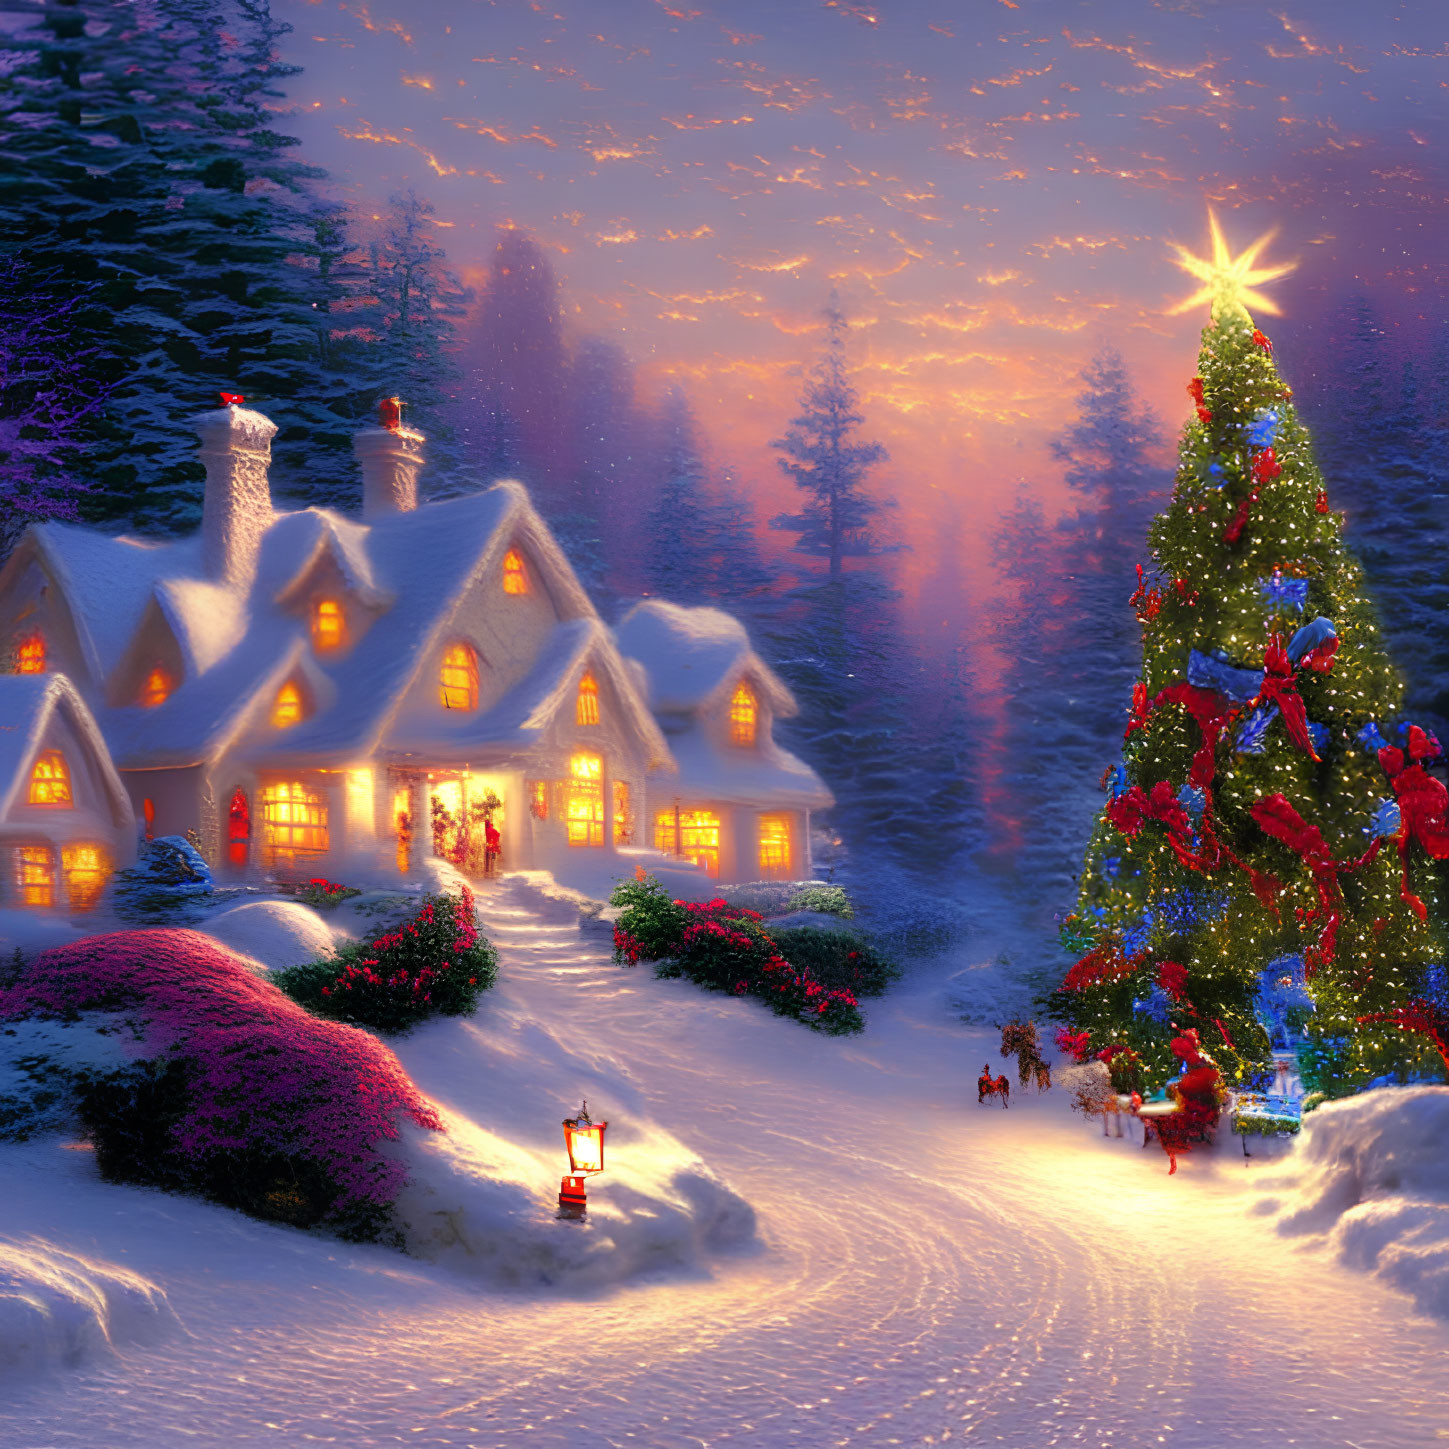 Snow-covered Christmas village with decorated tree and star-topped tree at dusk